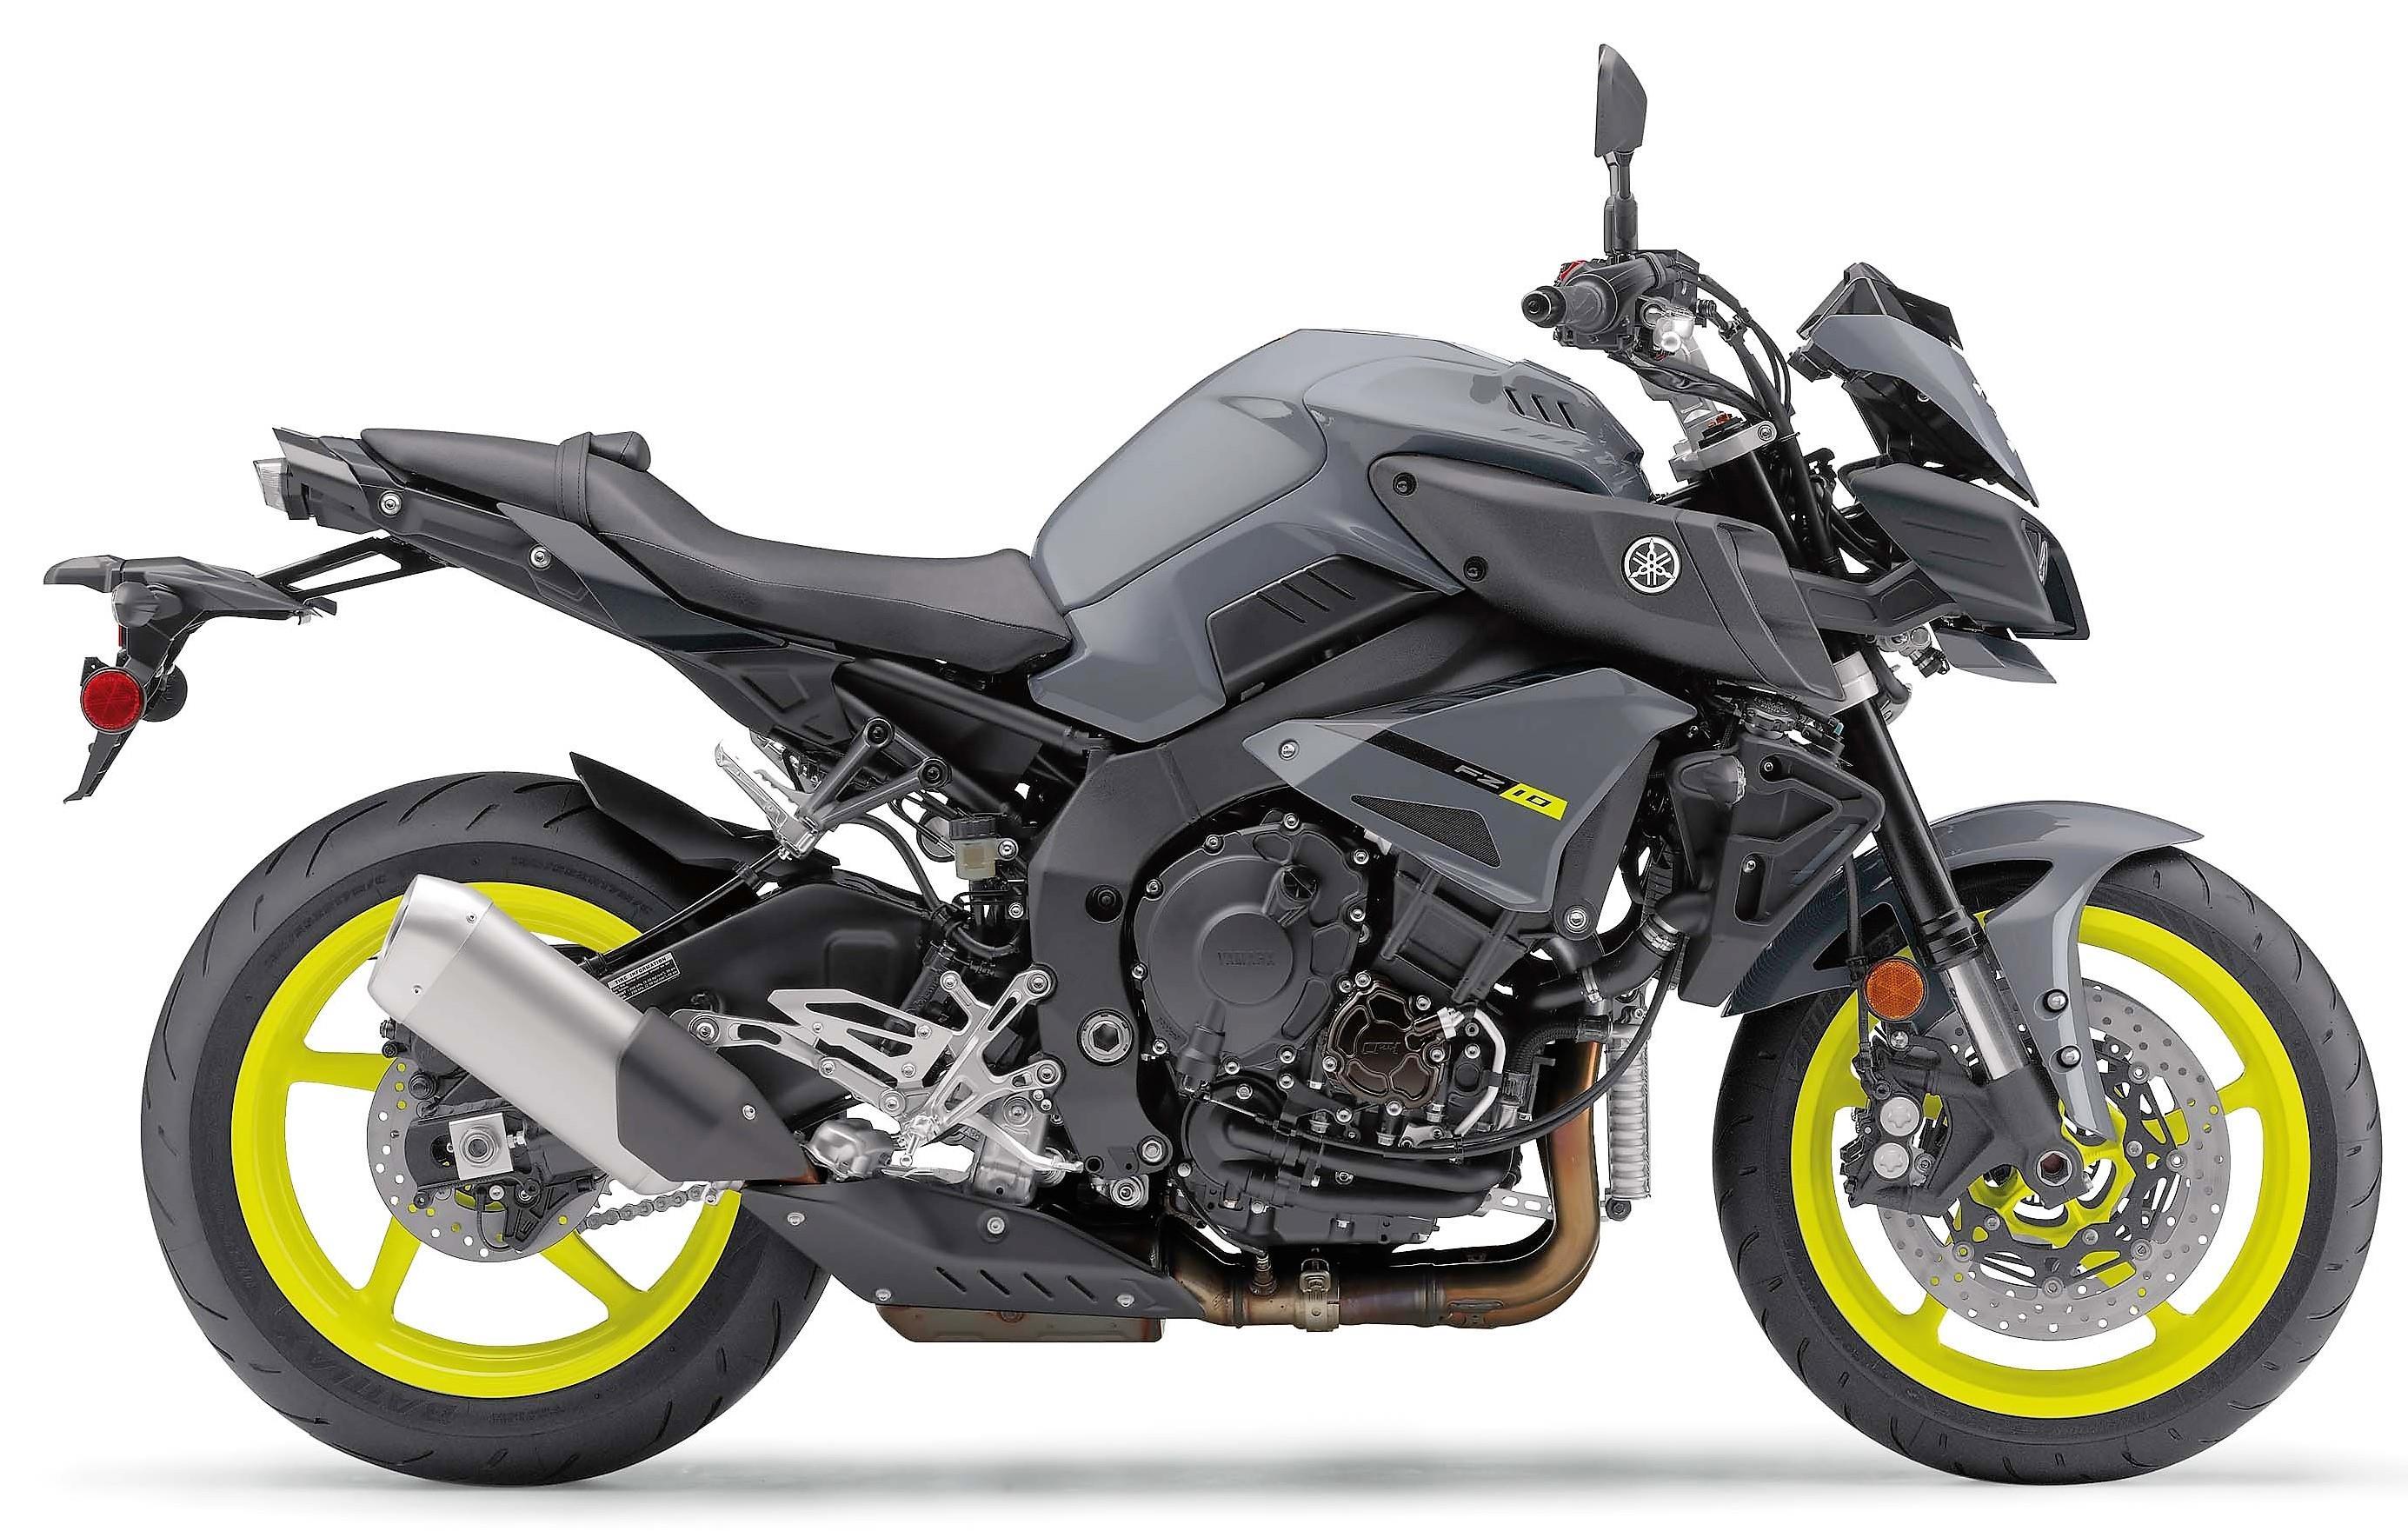 2022 Yamaha Specifications and Expected Price India